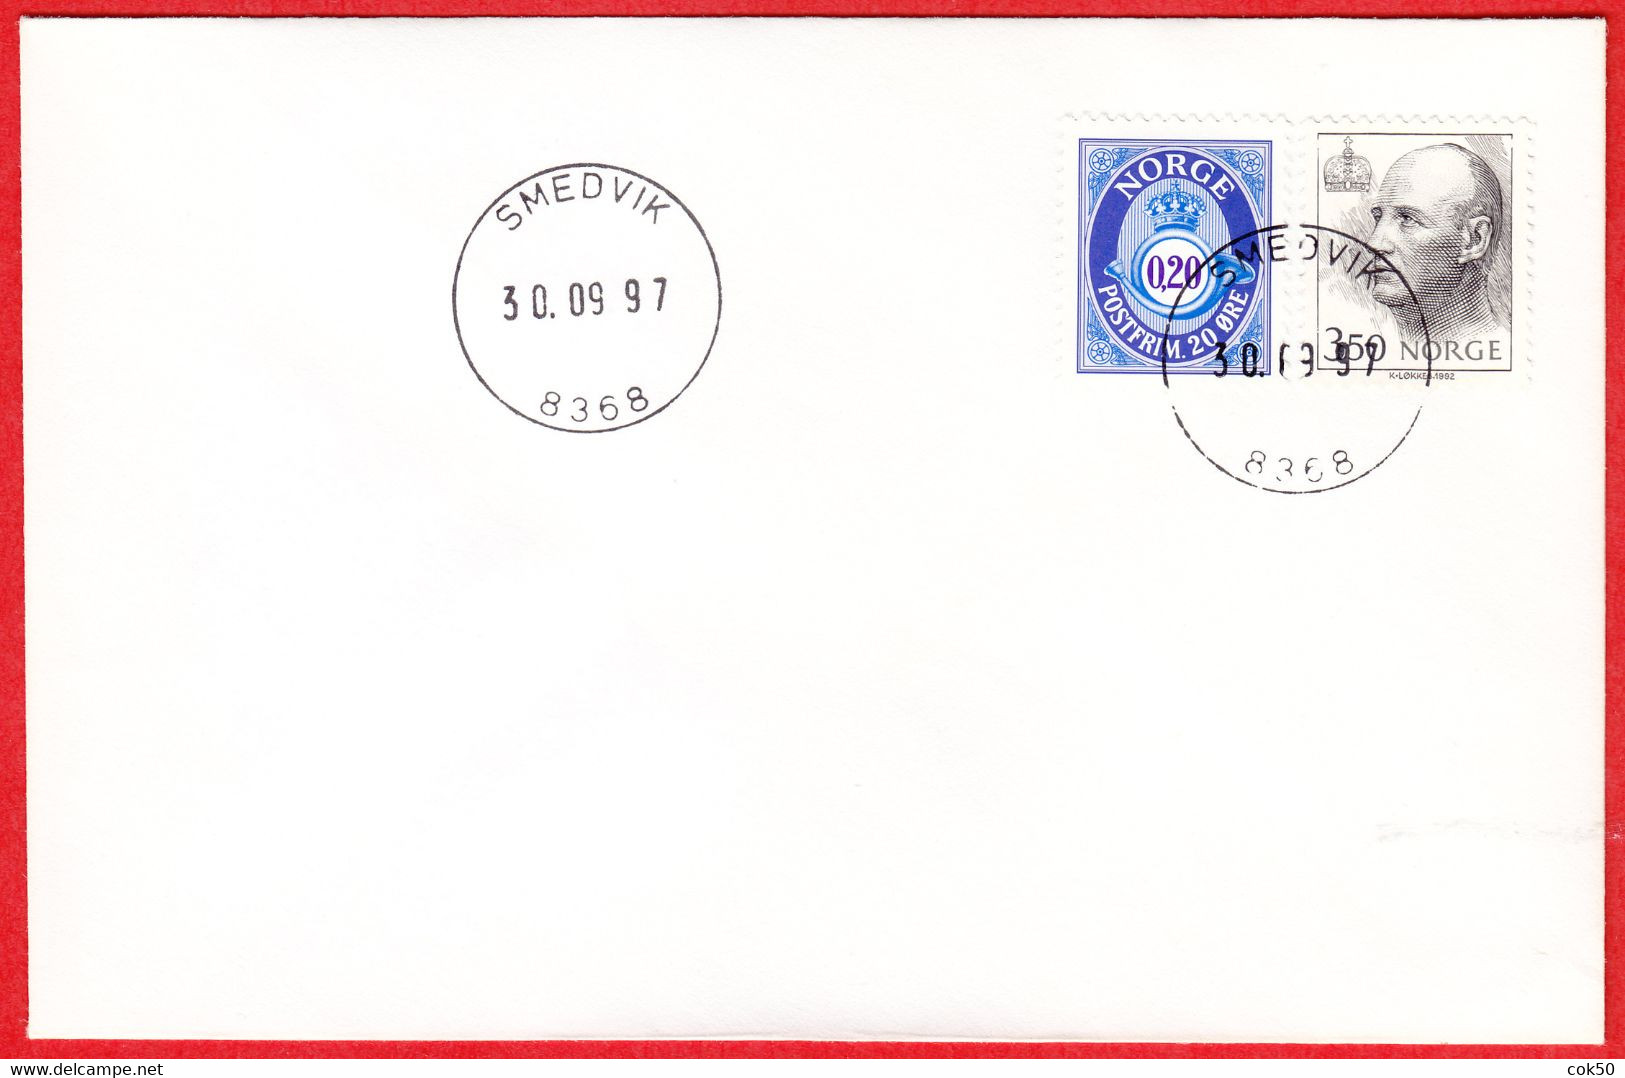 NORWAY -  8368 SMEDVIK - 24 MmØ - (Nordland County) - Last Day/postoffice Closed On 1997.09.30 - Emisiones Locales